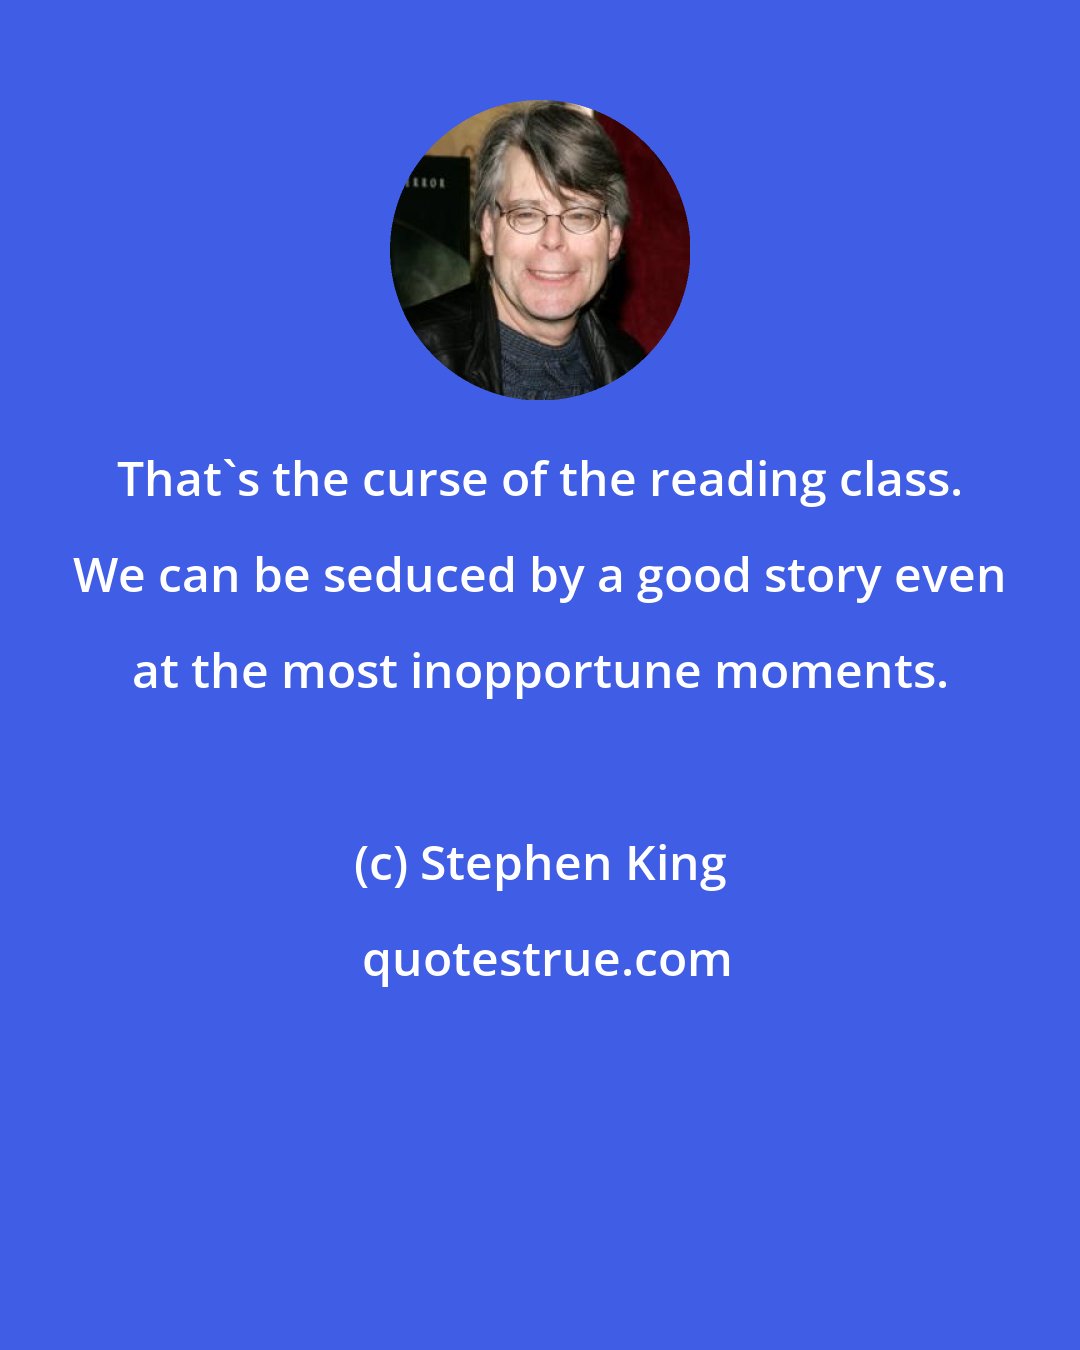 Stephen King: That's the curse of the reading class. We can be seduced by a good story even at the most inopportune moments.